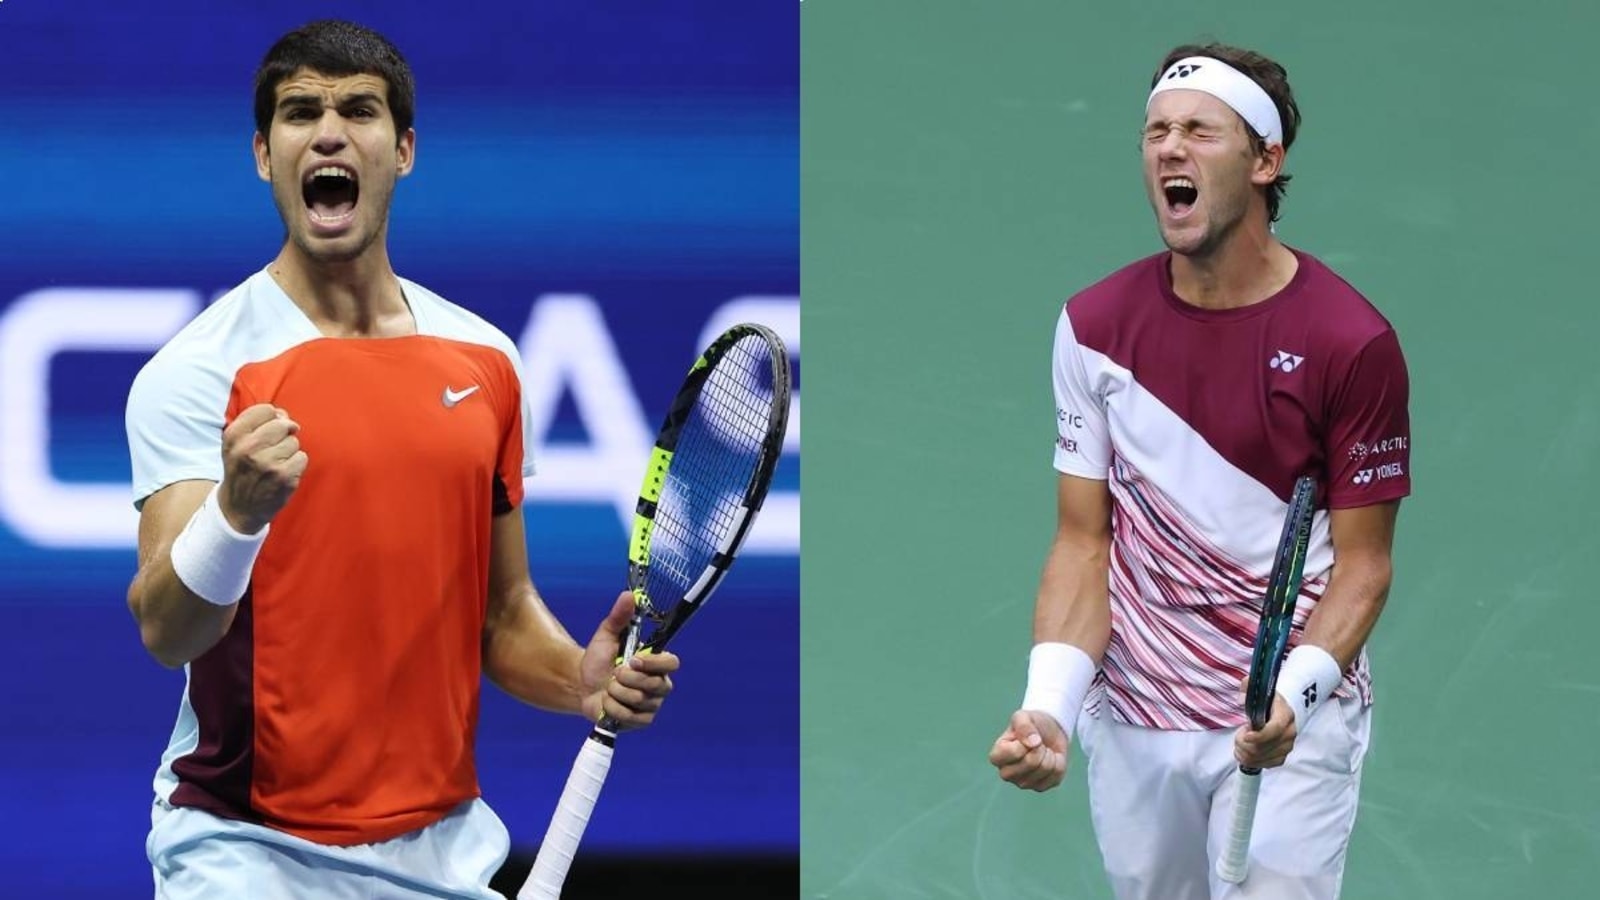 US Open final Alcaraz vs Ruud H2H tie, key stats - All you need to know Tennis News